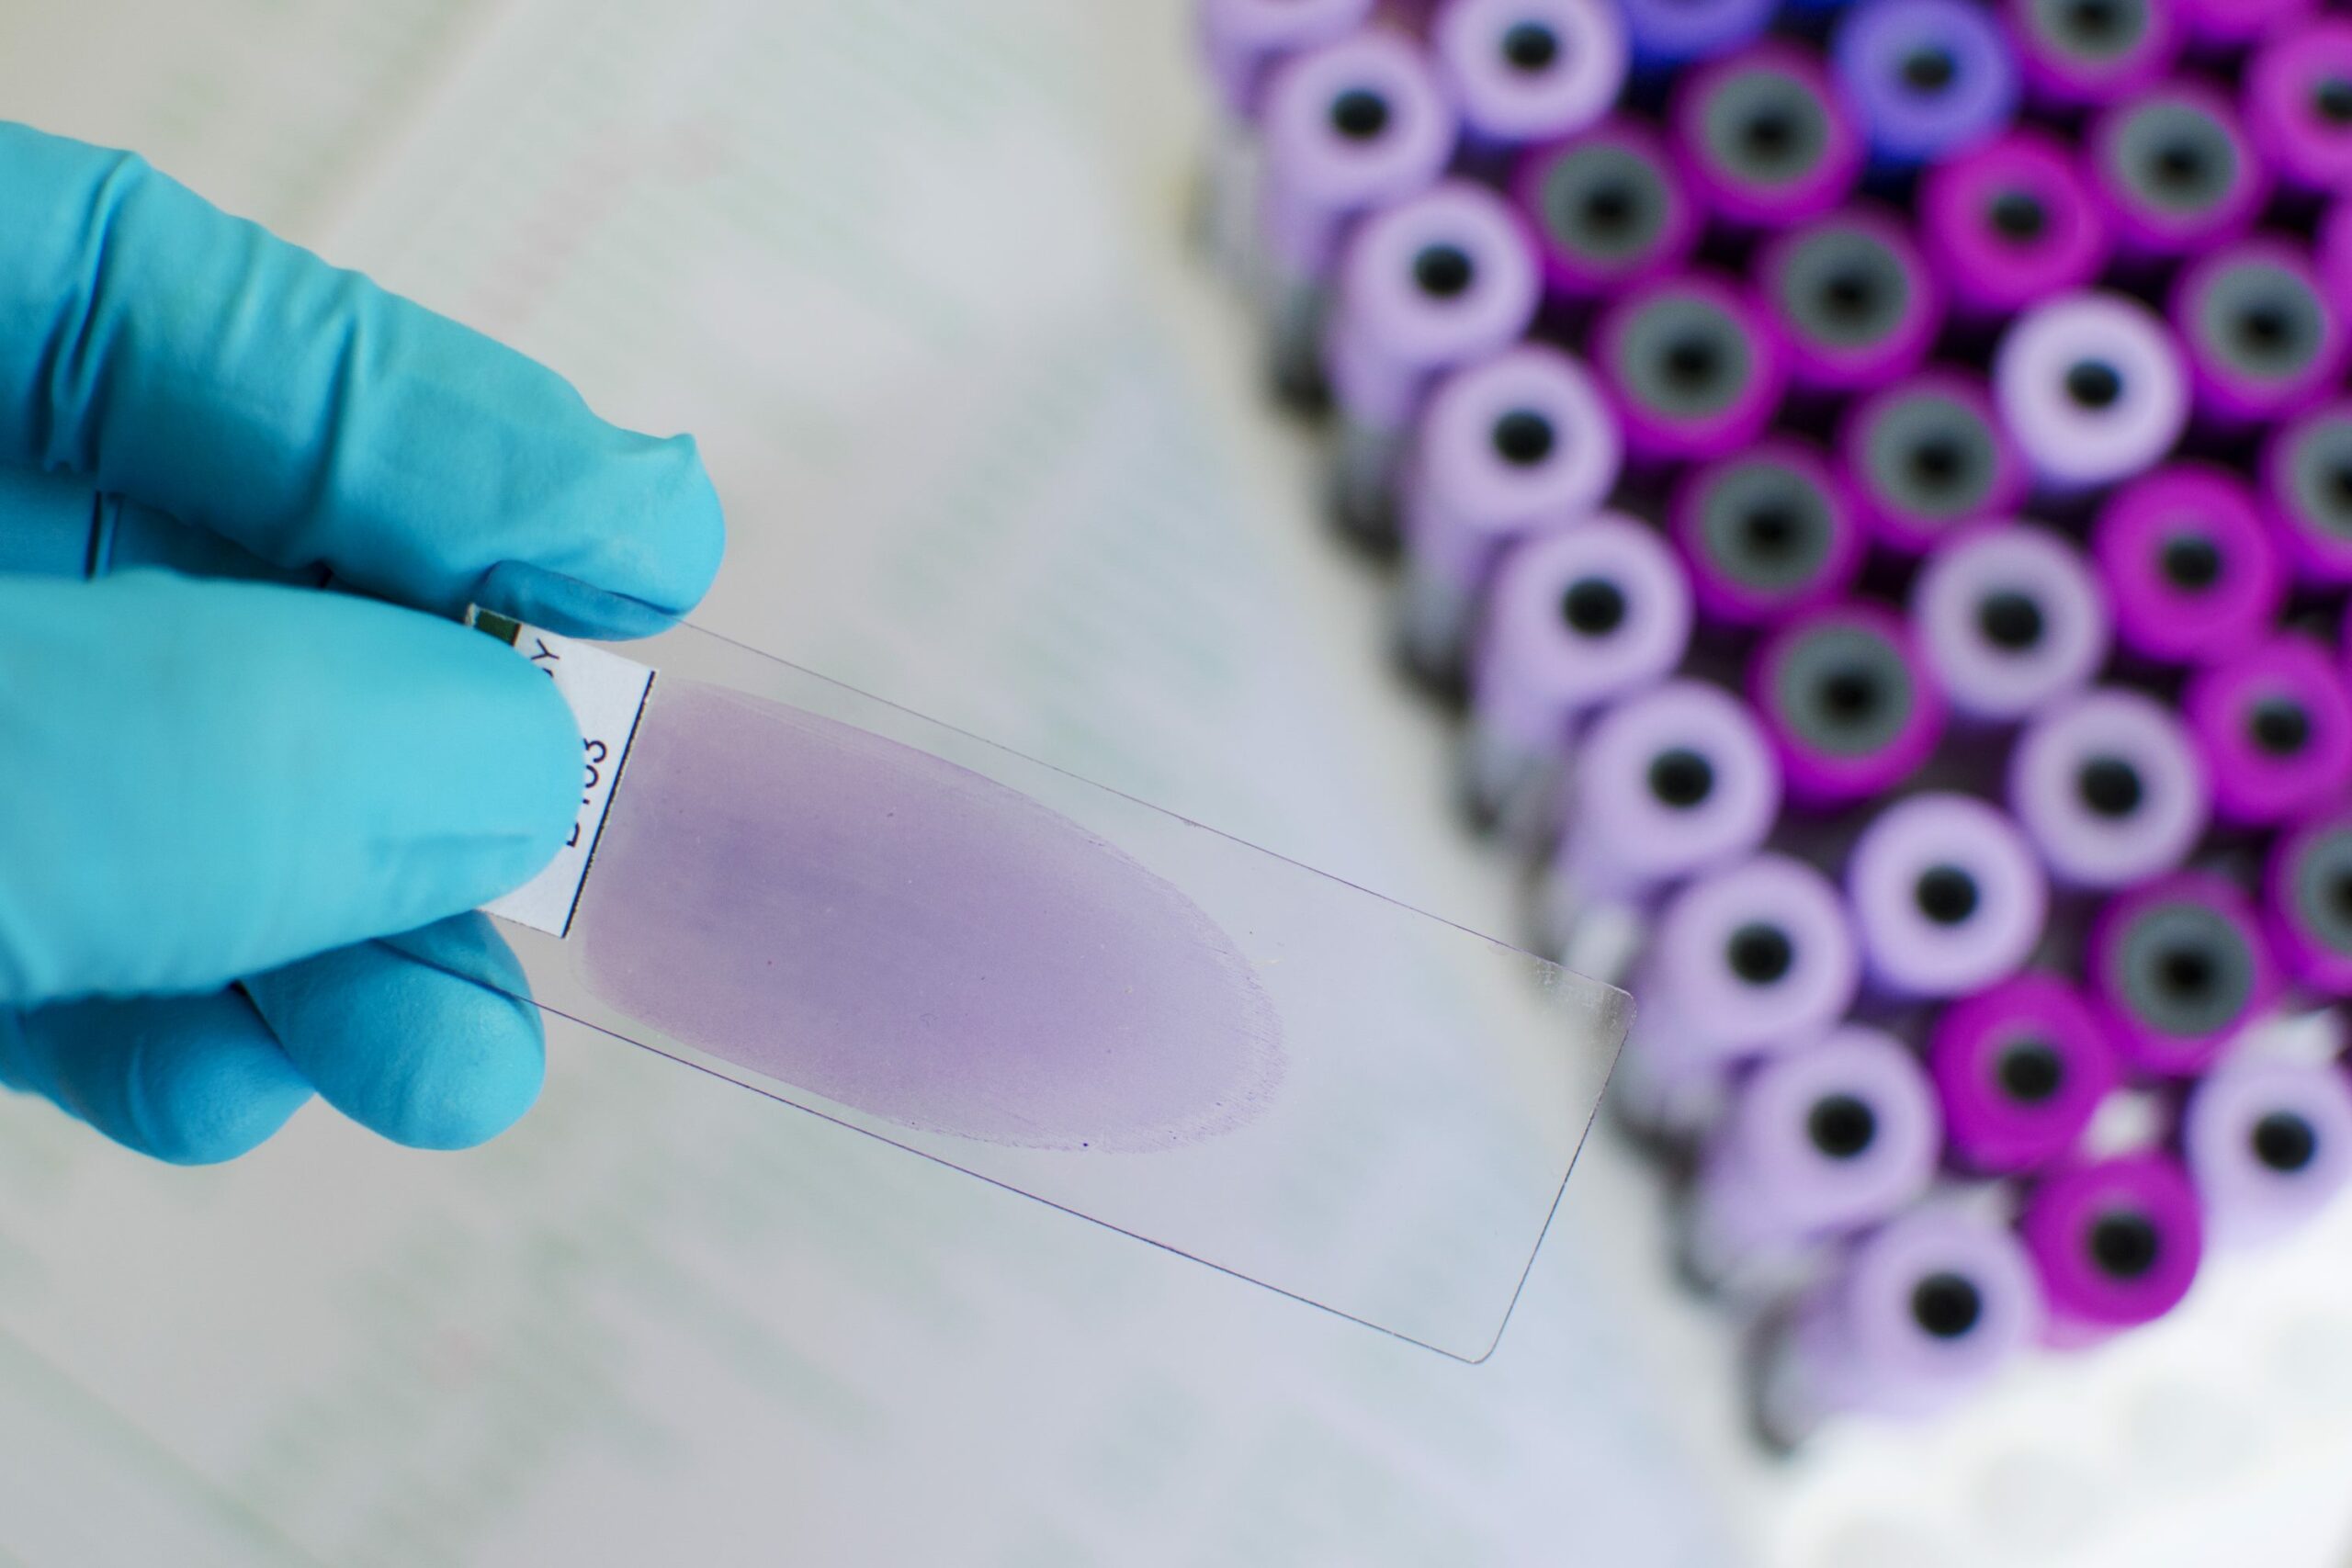 a gloved had holds a slide containing a purple sample in the foreground, a collection of purple vials in the background